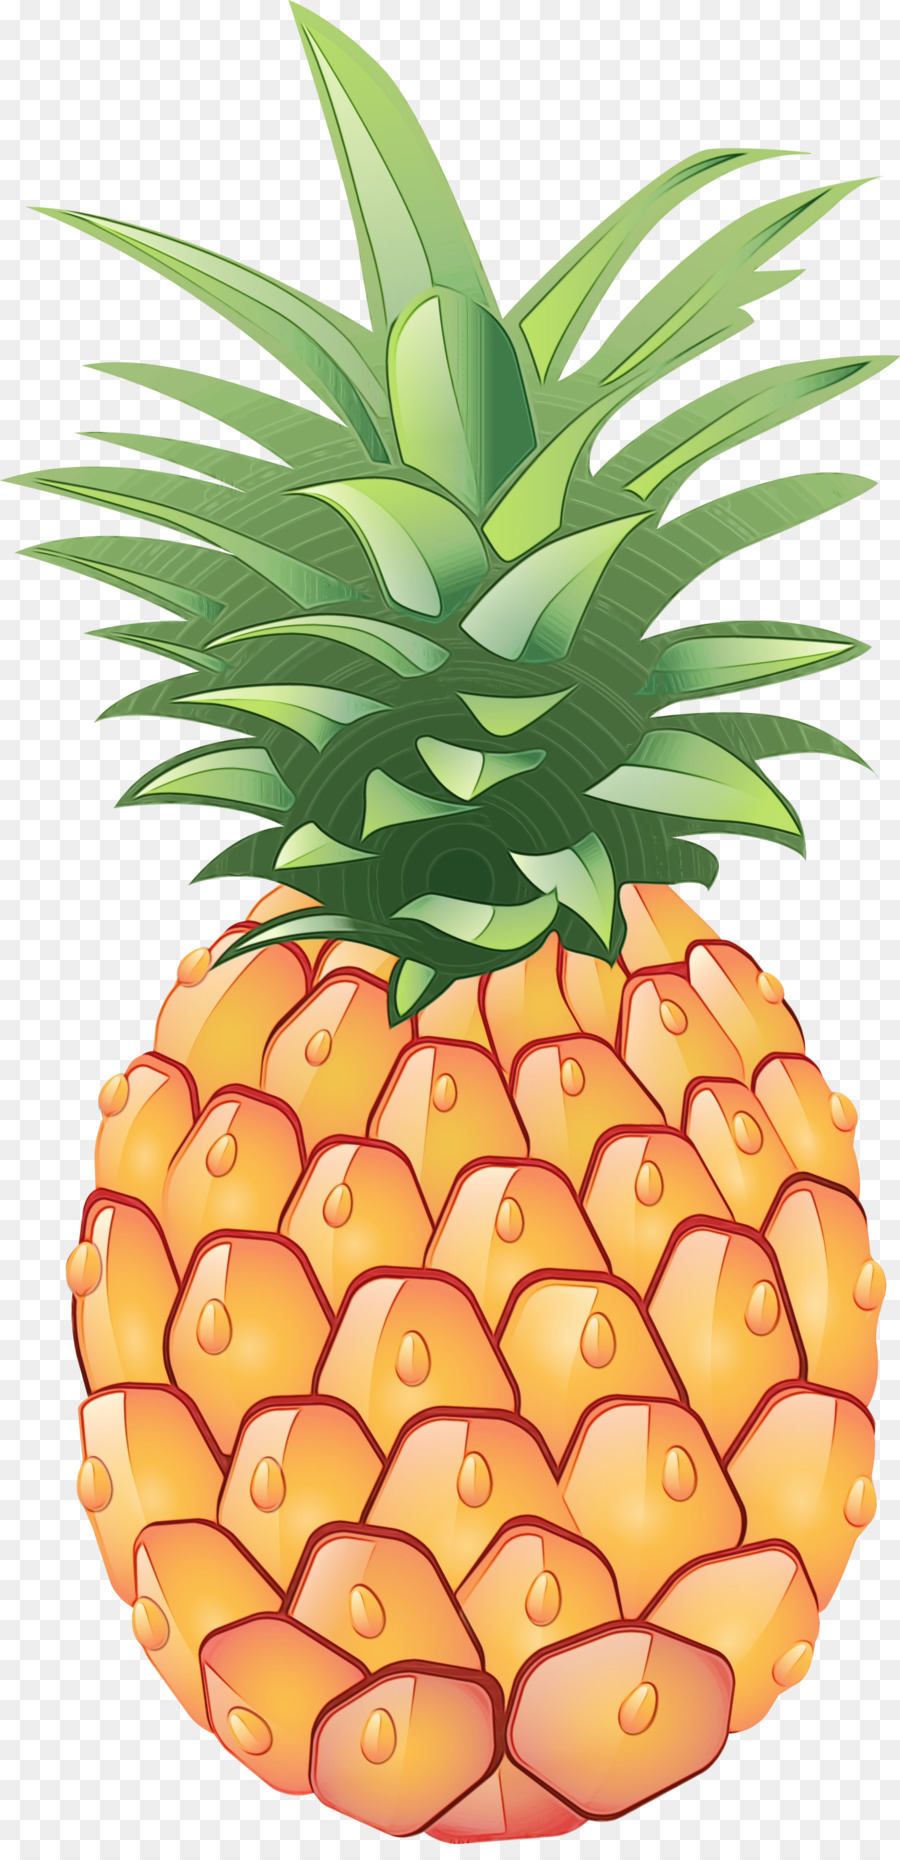 Pineapple Juice Clip art Portable Network Graphics Pineapple Juice -  png download - 1463*2999 - Free Transparent Pineapple png Download.